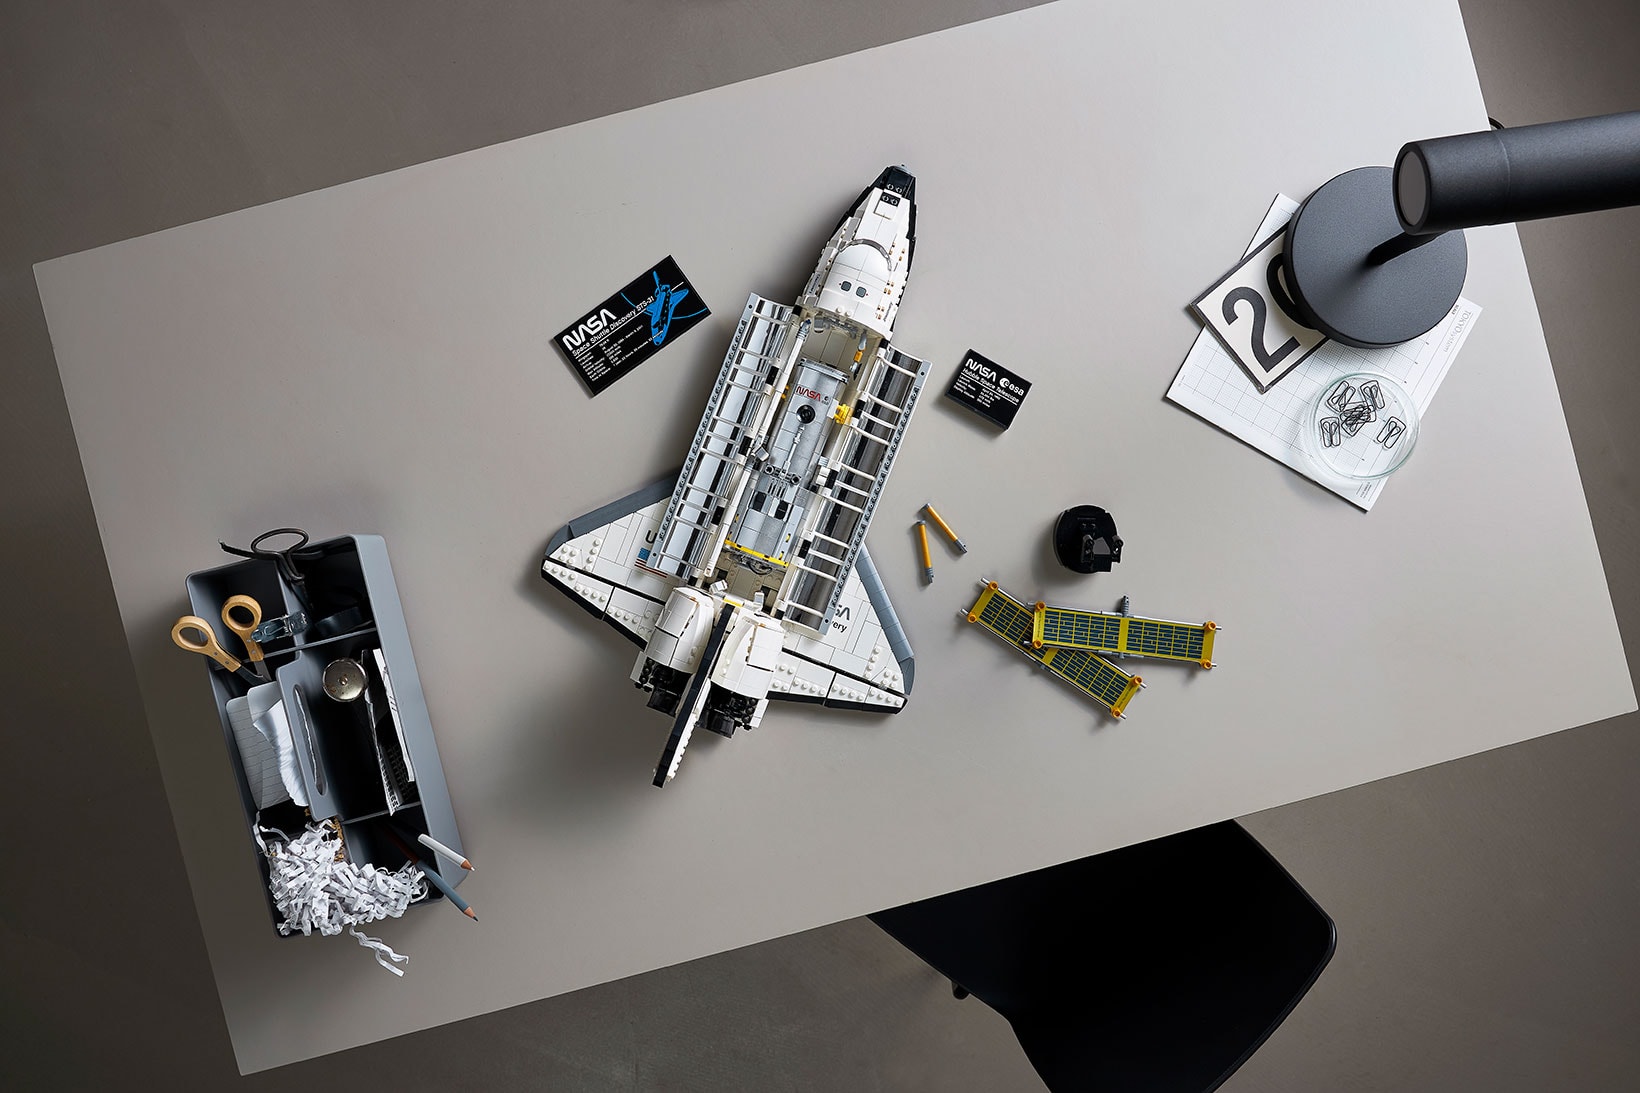 lego nasa discovery space shuttle set collaboration kathy sullivan astronaut sts 31 mission pieces inside